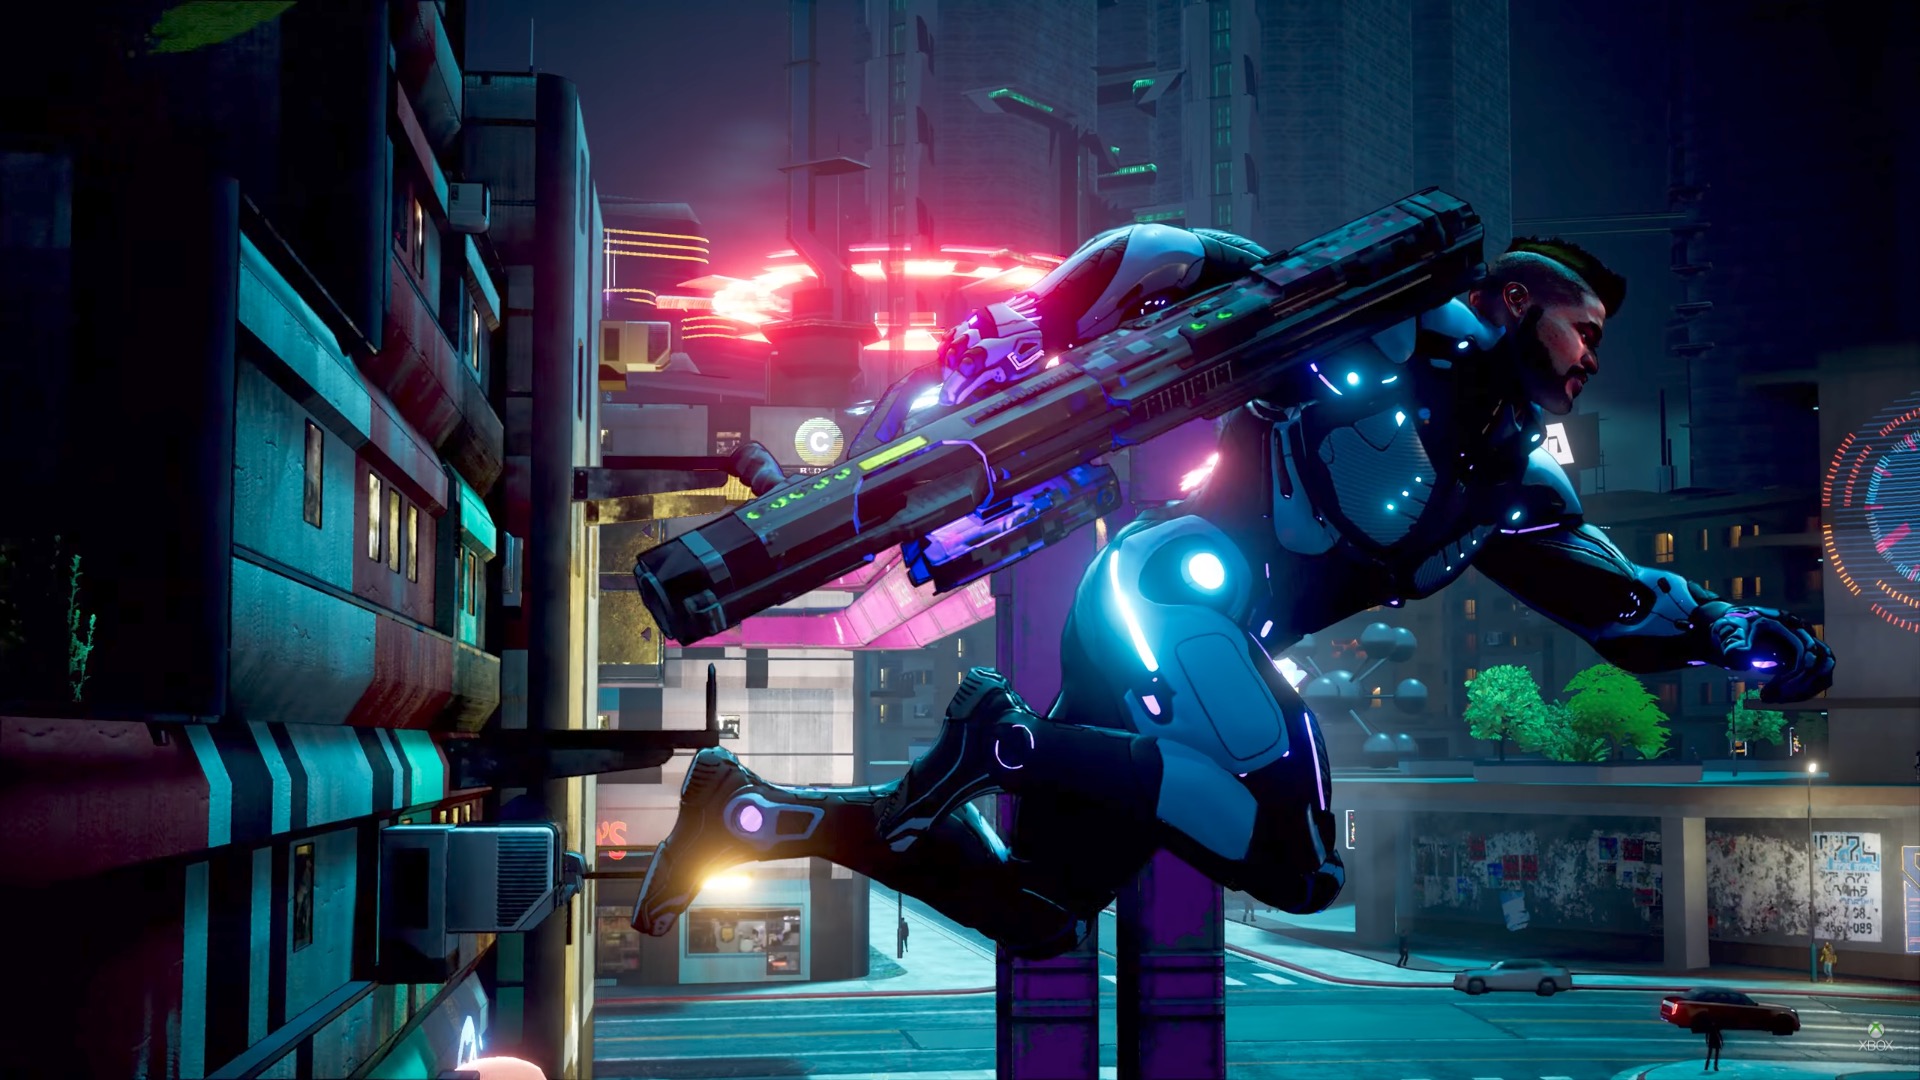 crackdown 3 cancelled